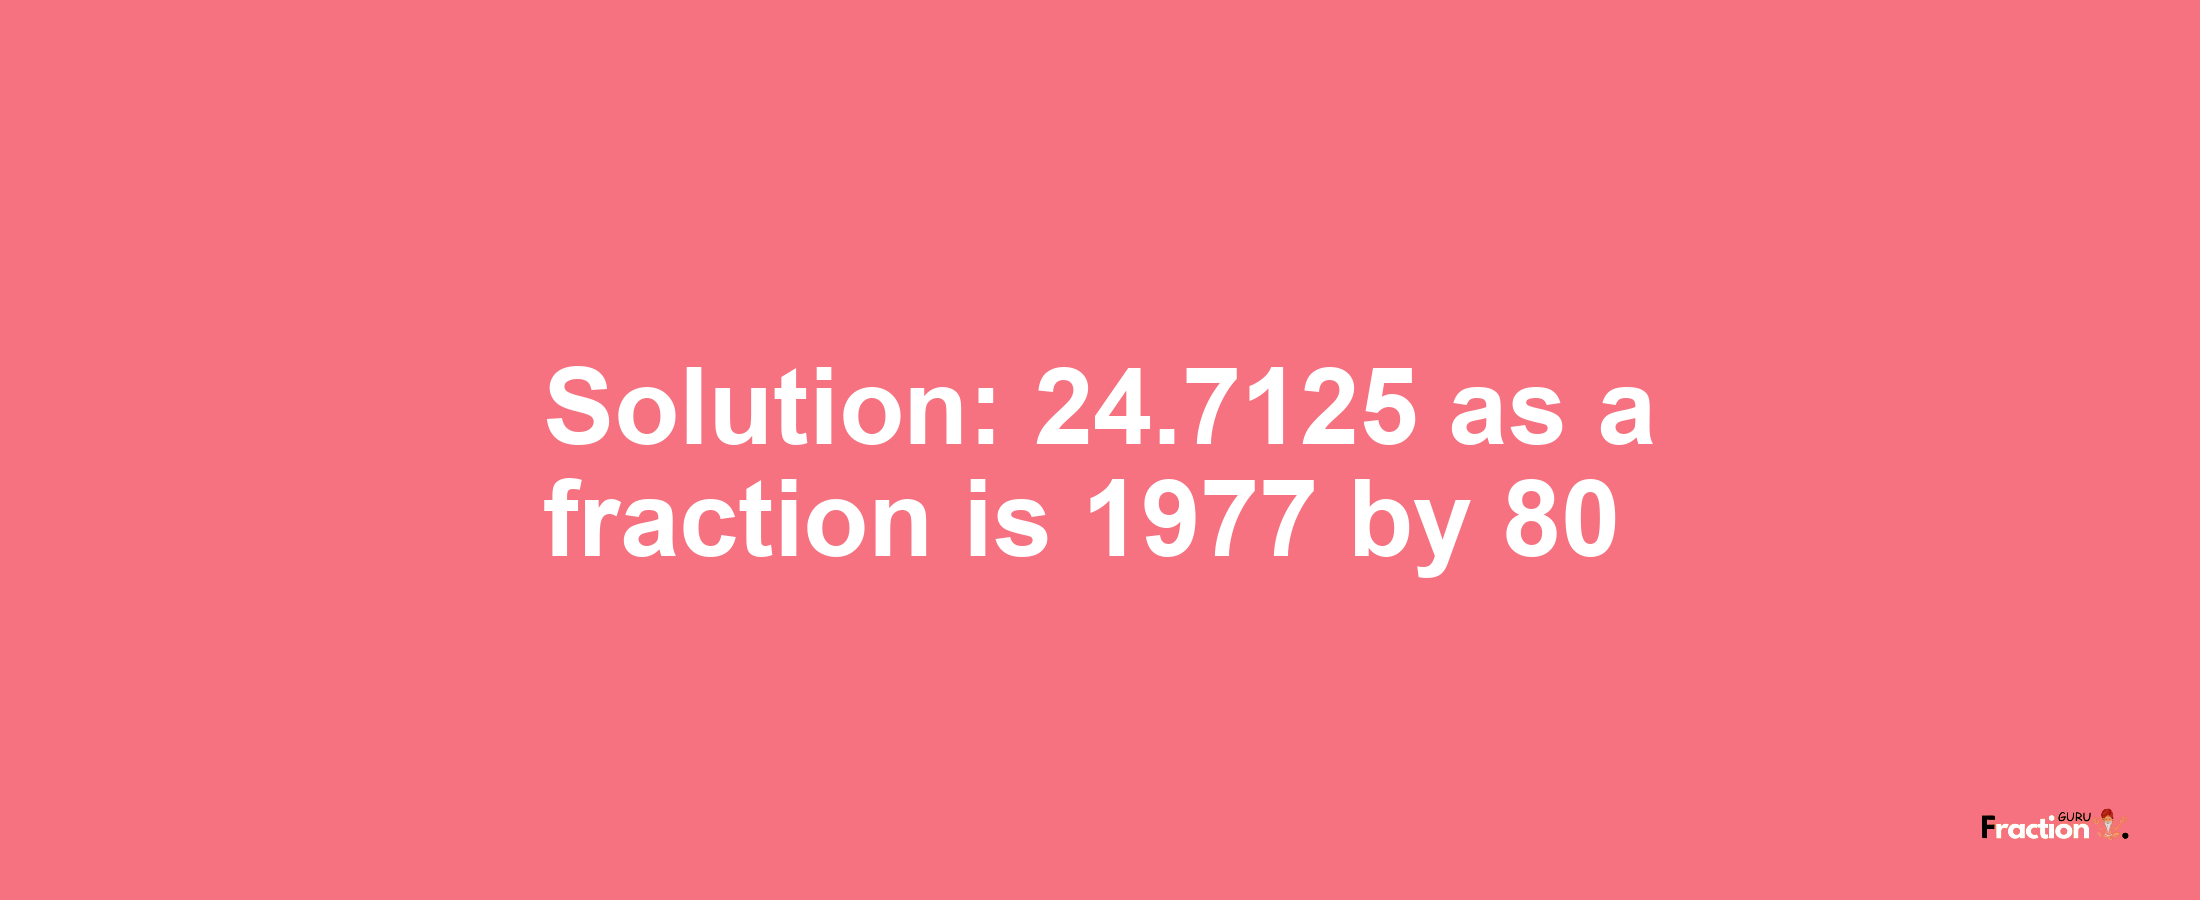 Solution:24.7125 as a fraction is 1977/80